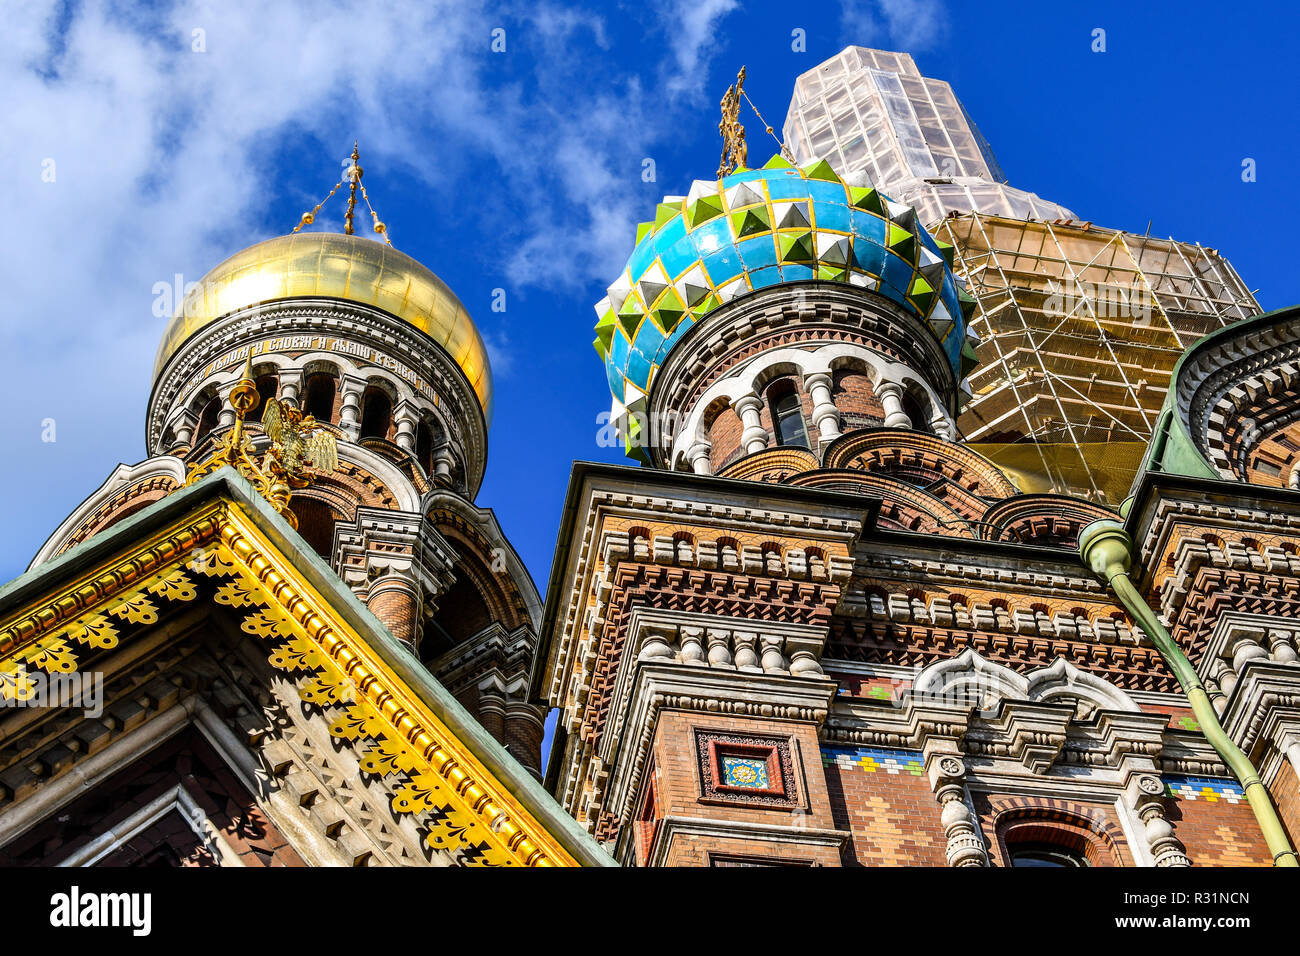 The medieval onion domes and facade of the Church of the Savior on Spilled Blood in St. Petersburg, Russia. Stock Photo